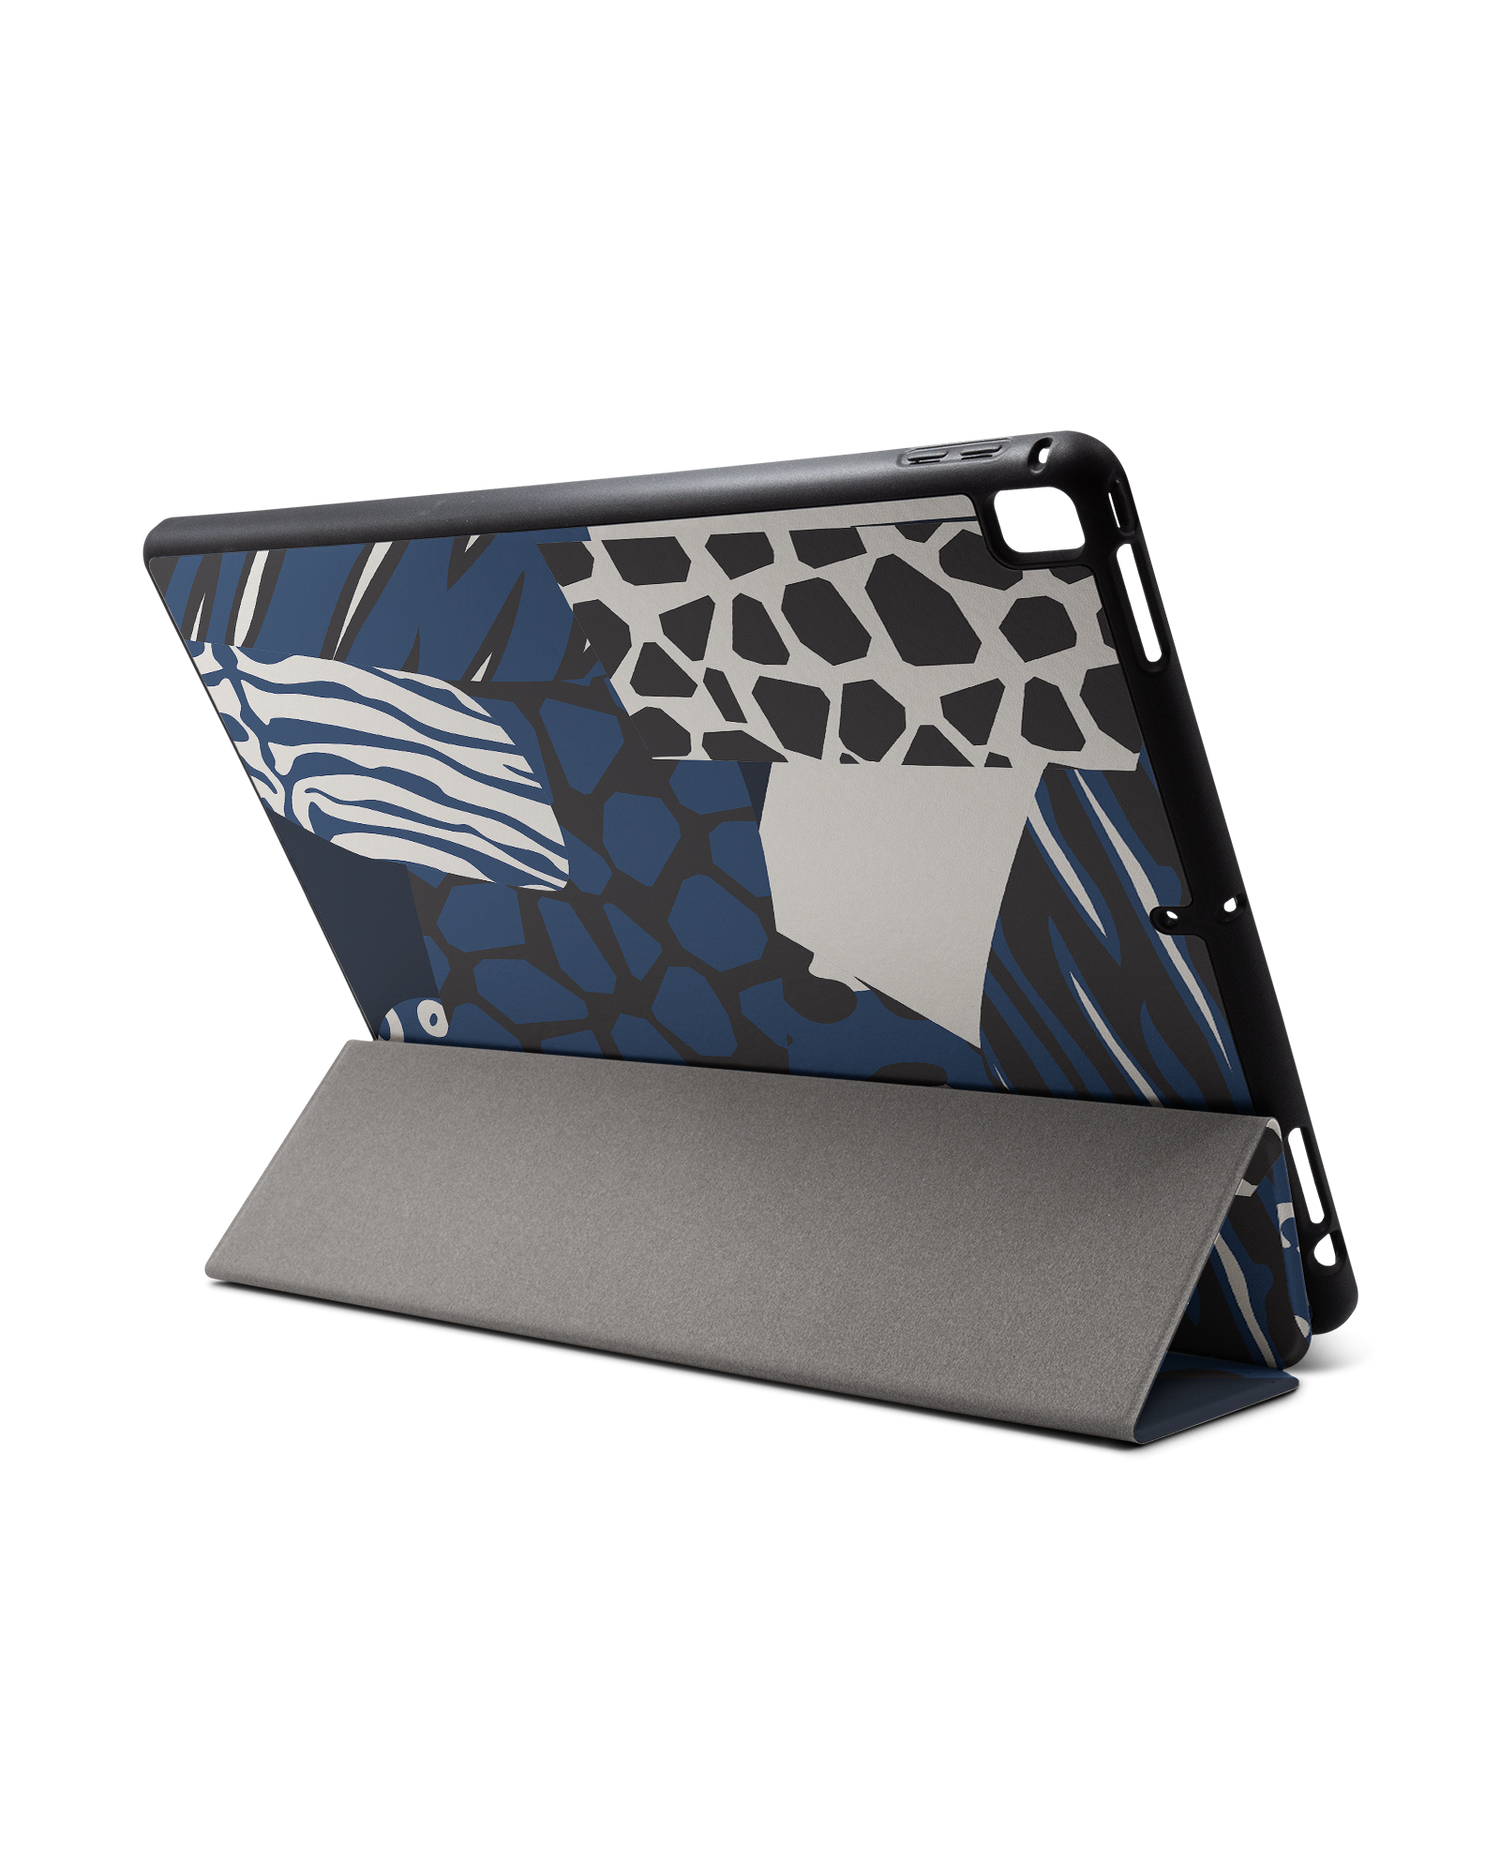 Animal Print Patchwork iPad Case with Pencil Holder for Apple iPad Pro 2 12.9